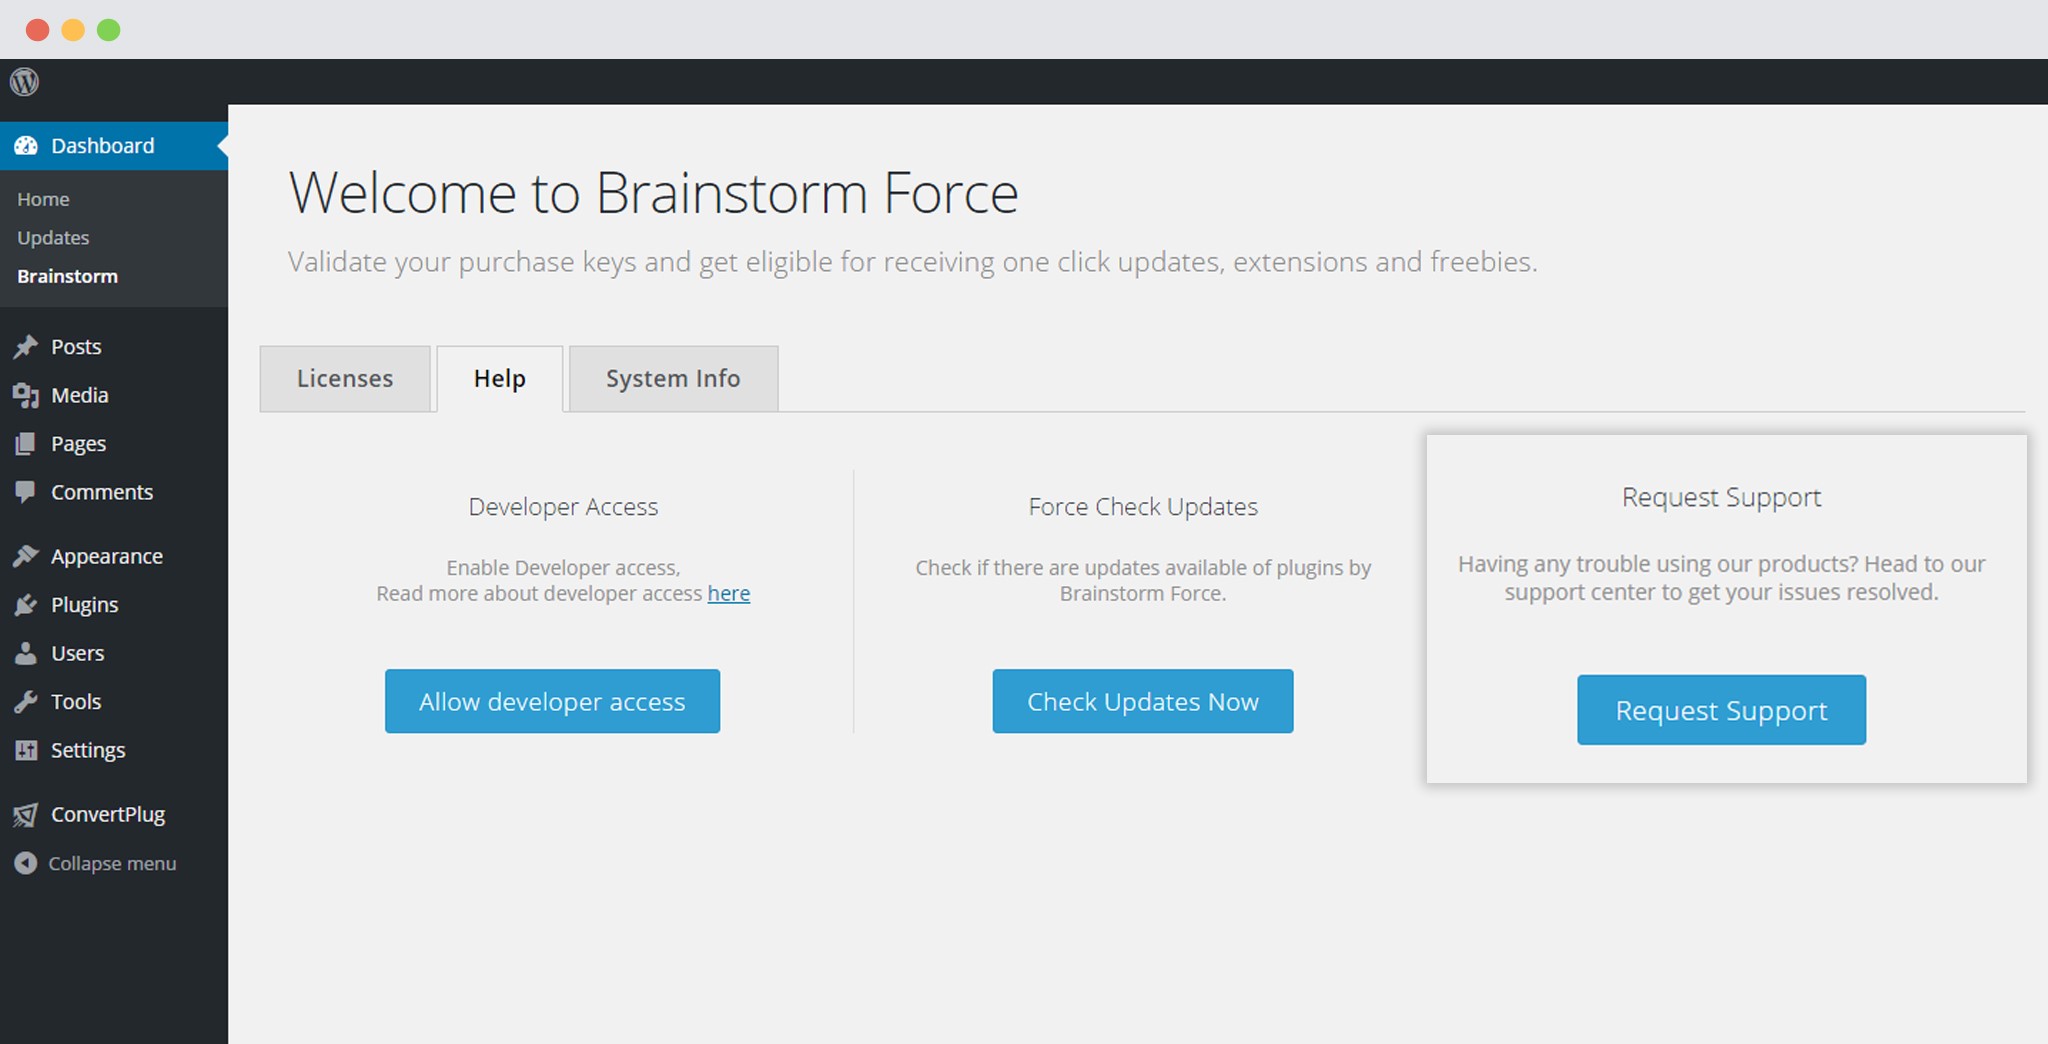 Request-support from Brainstorm Force